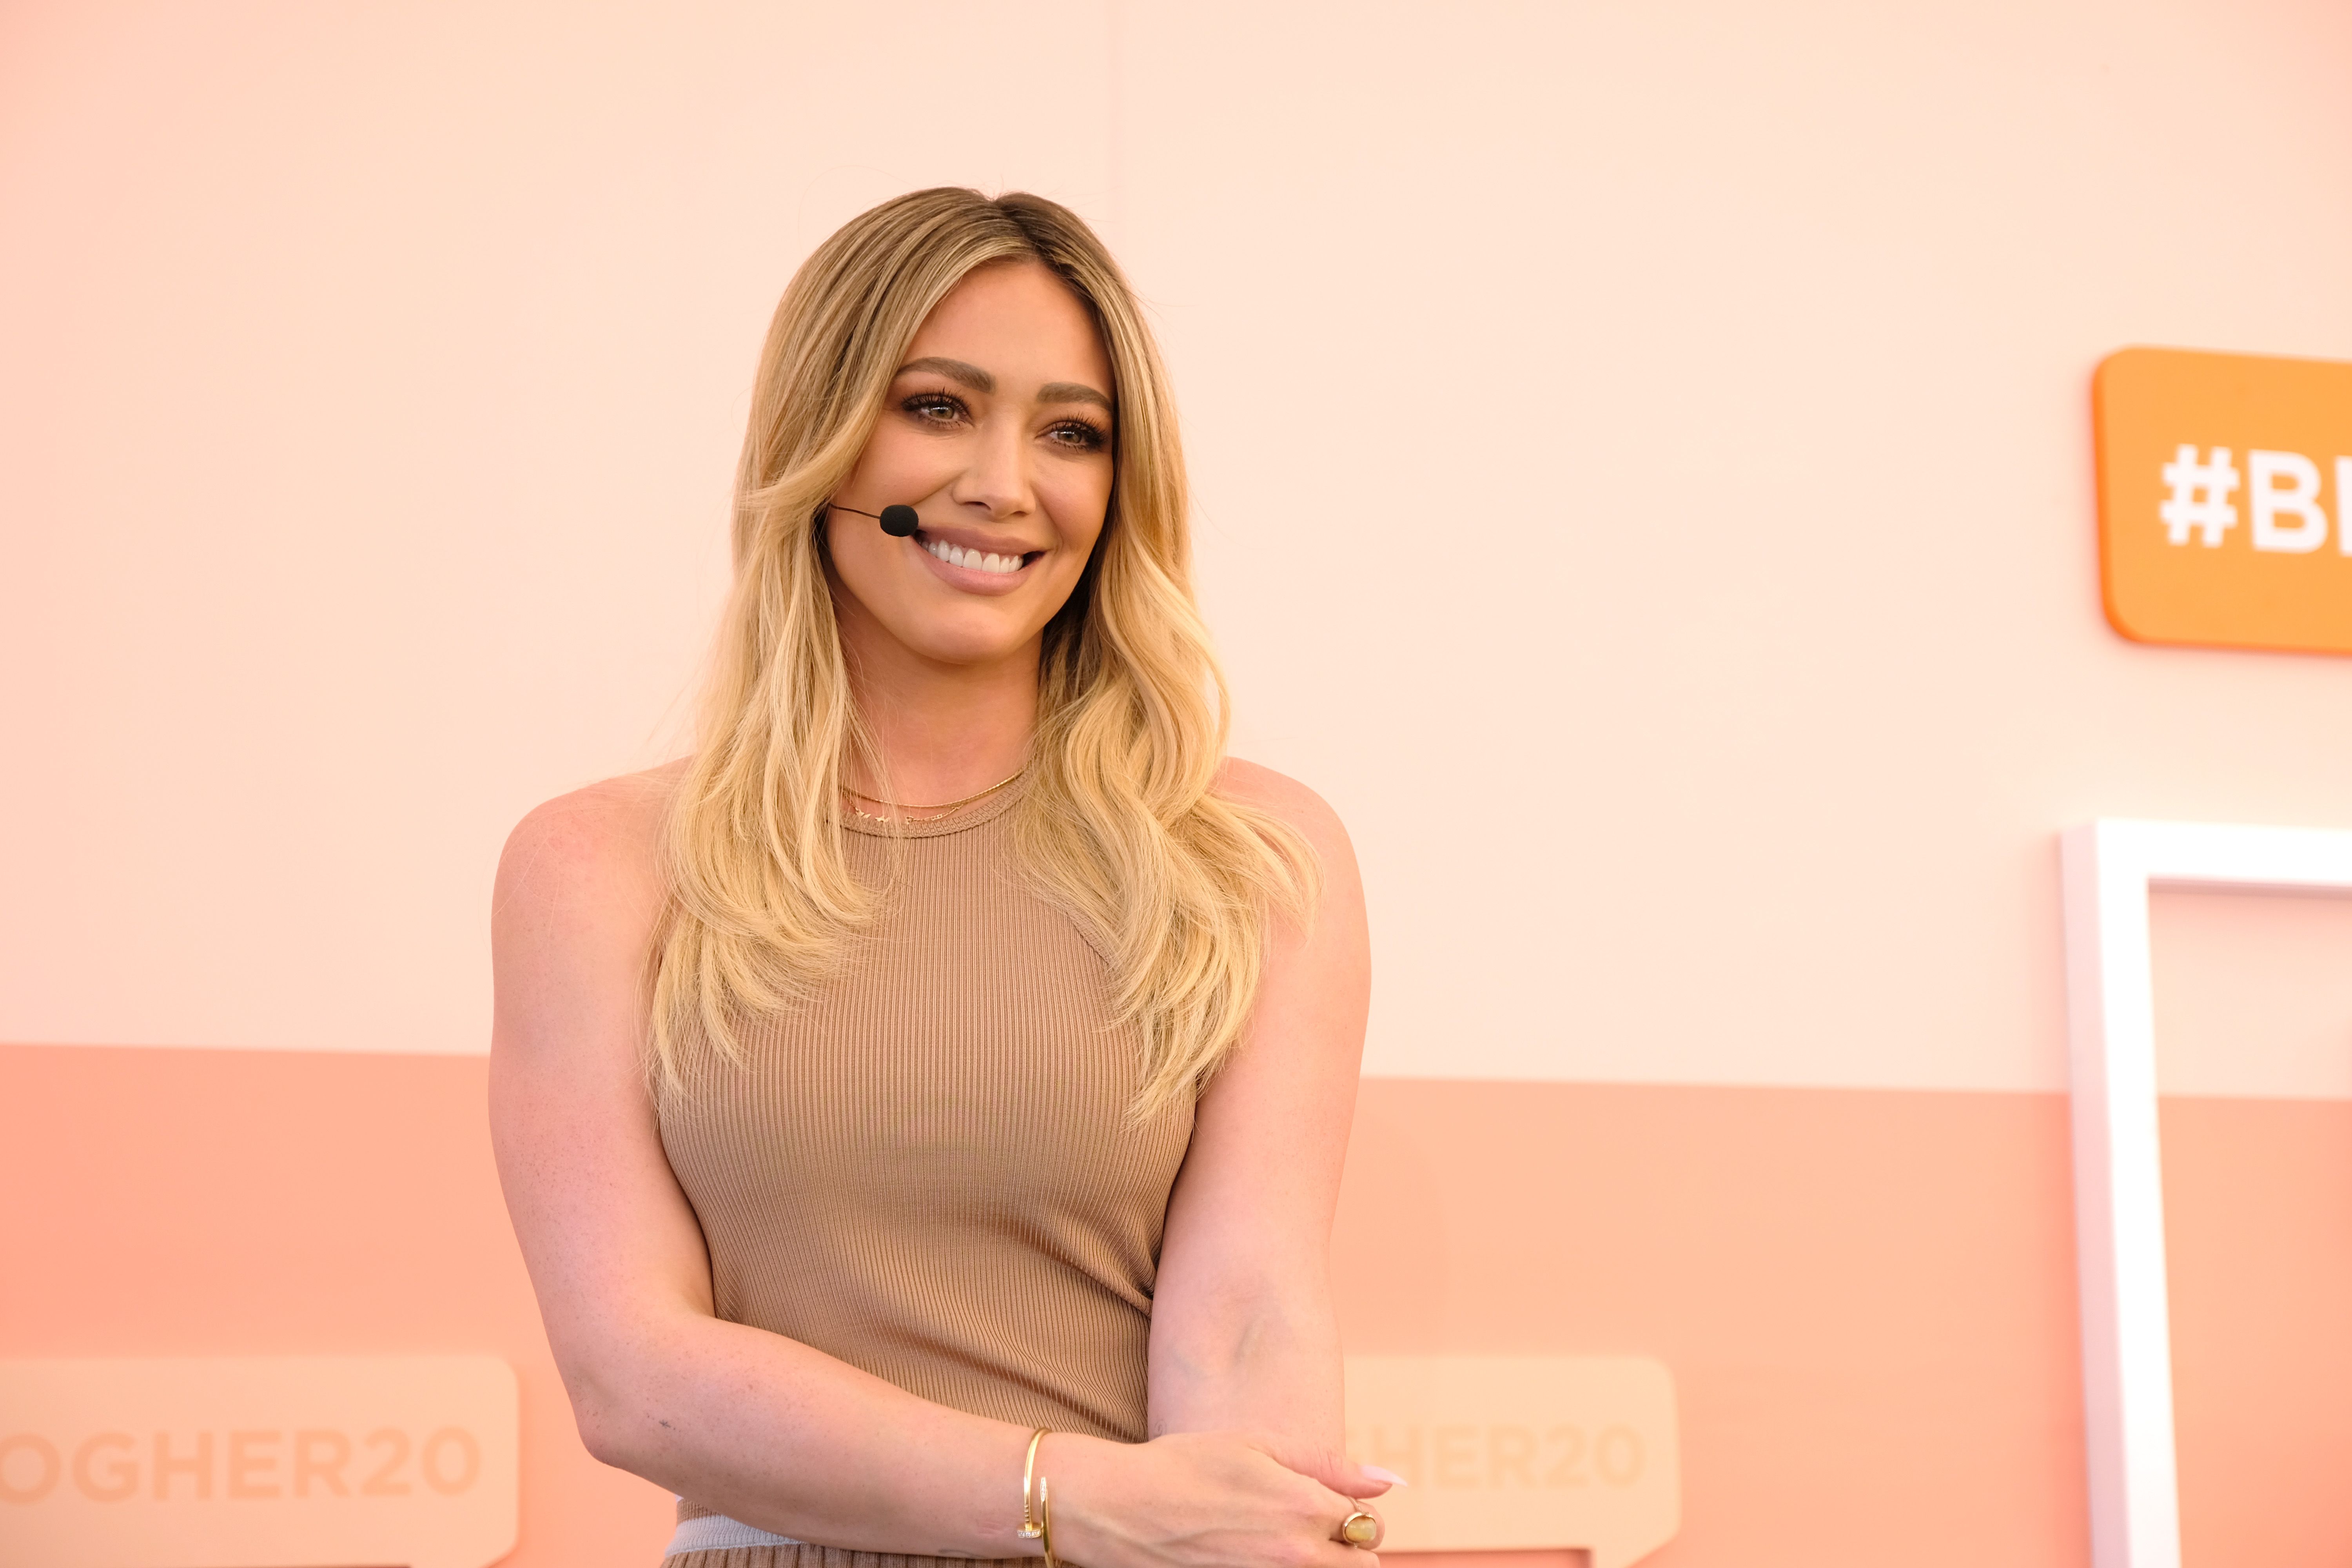 Lizzie Mcguire Have Sex - Why Hilary Duff Wants Lizzie McGuire to Move to Hulu